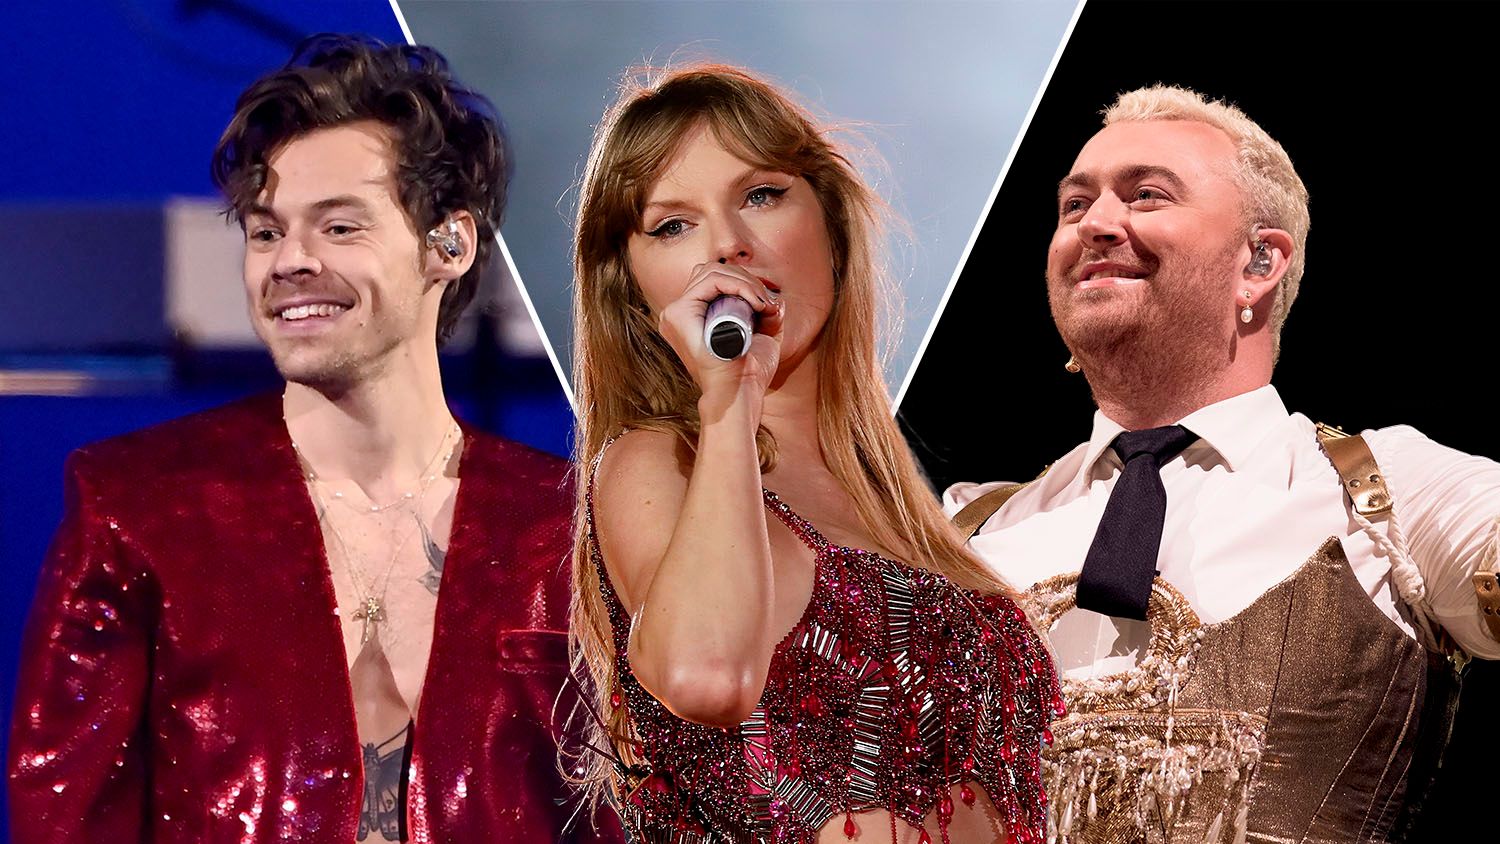 Super Bowl Half-Time show: Who was rumoured to perform?